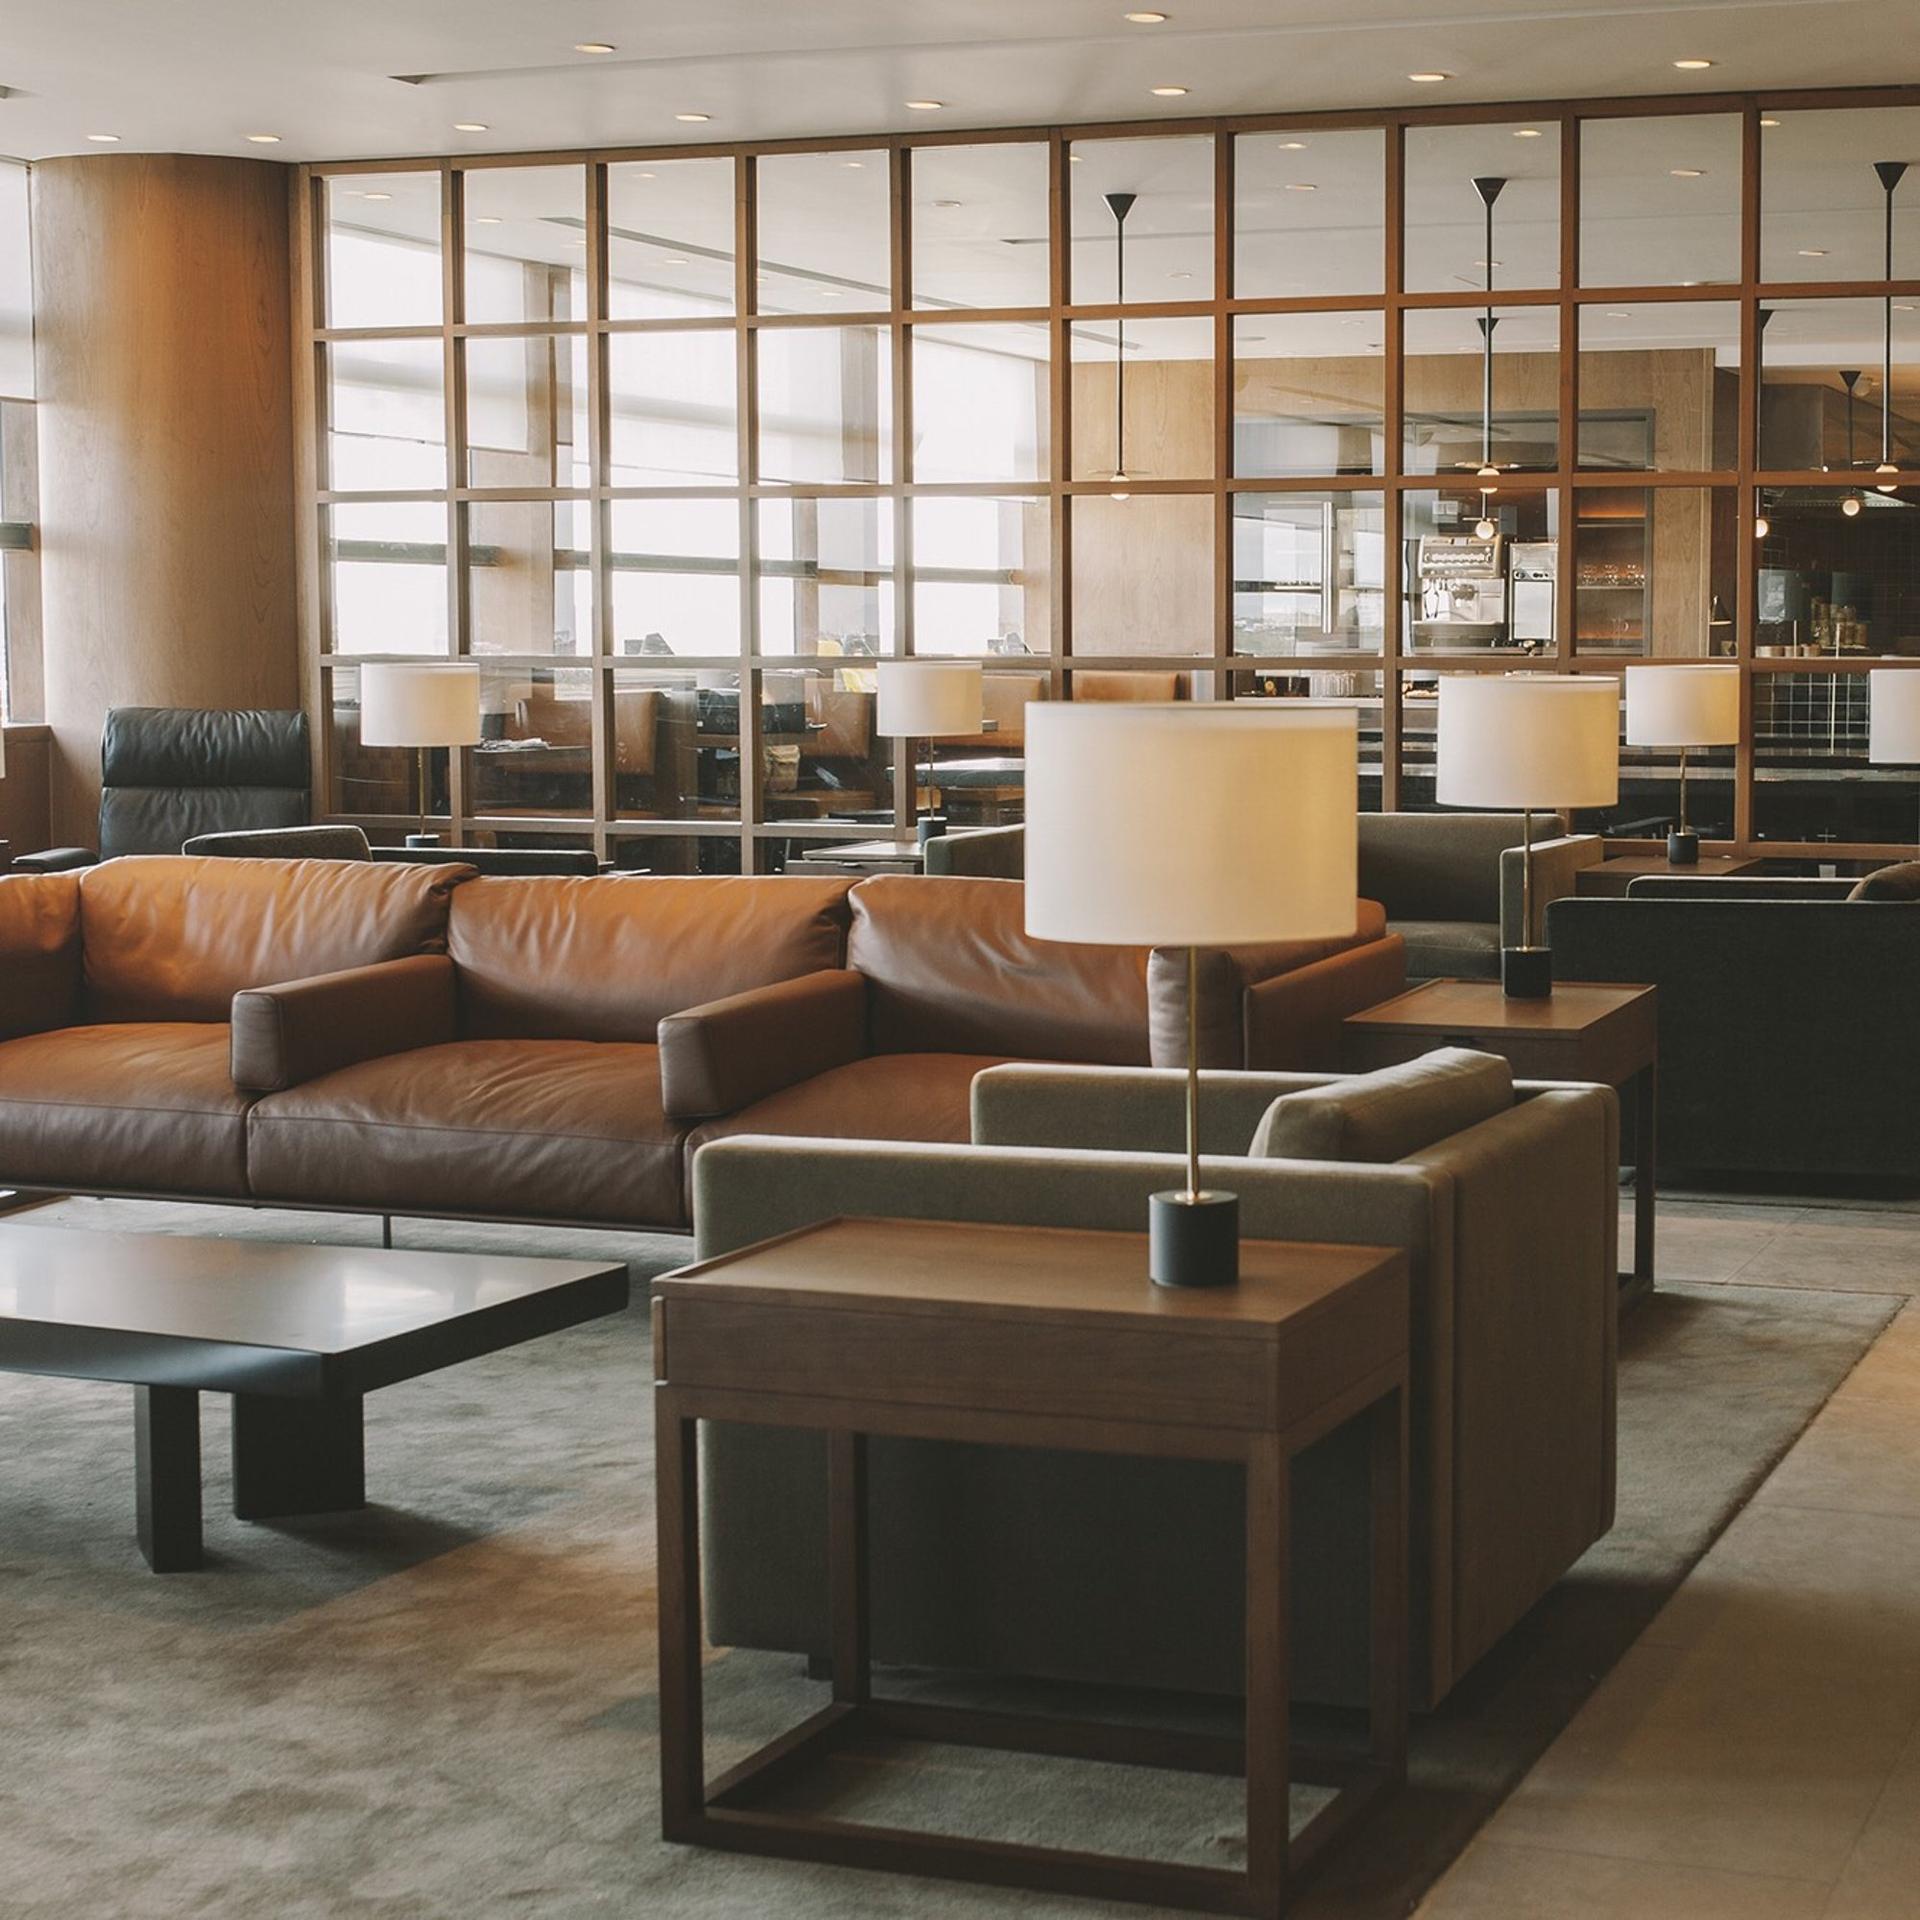 Cathay Pacific First and Business Class Lounge image 3 of 19